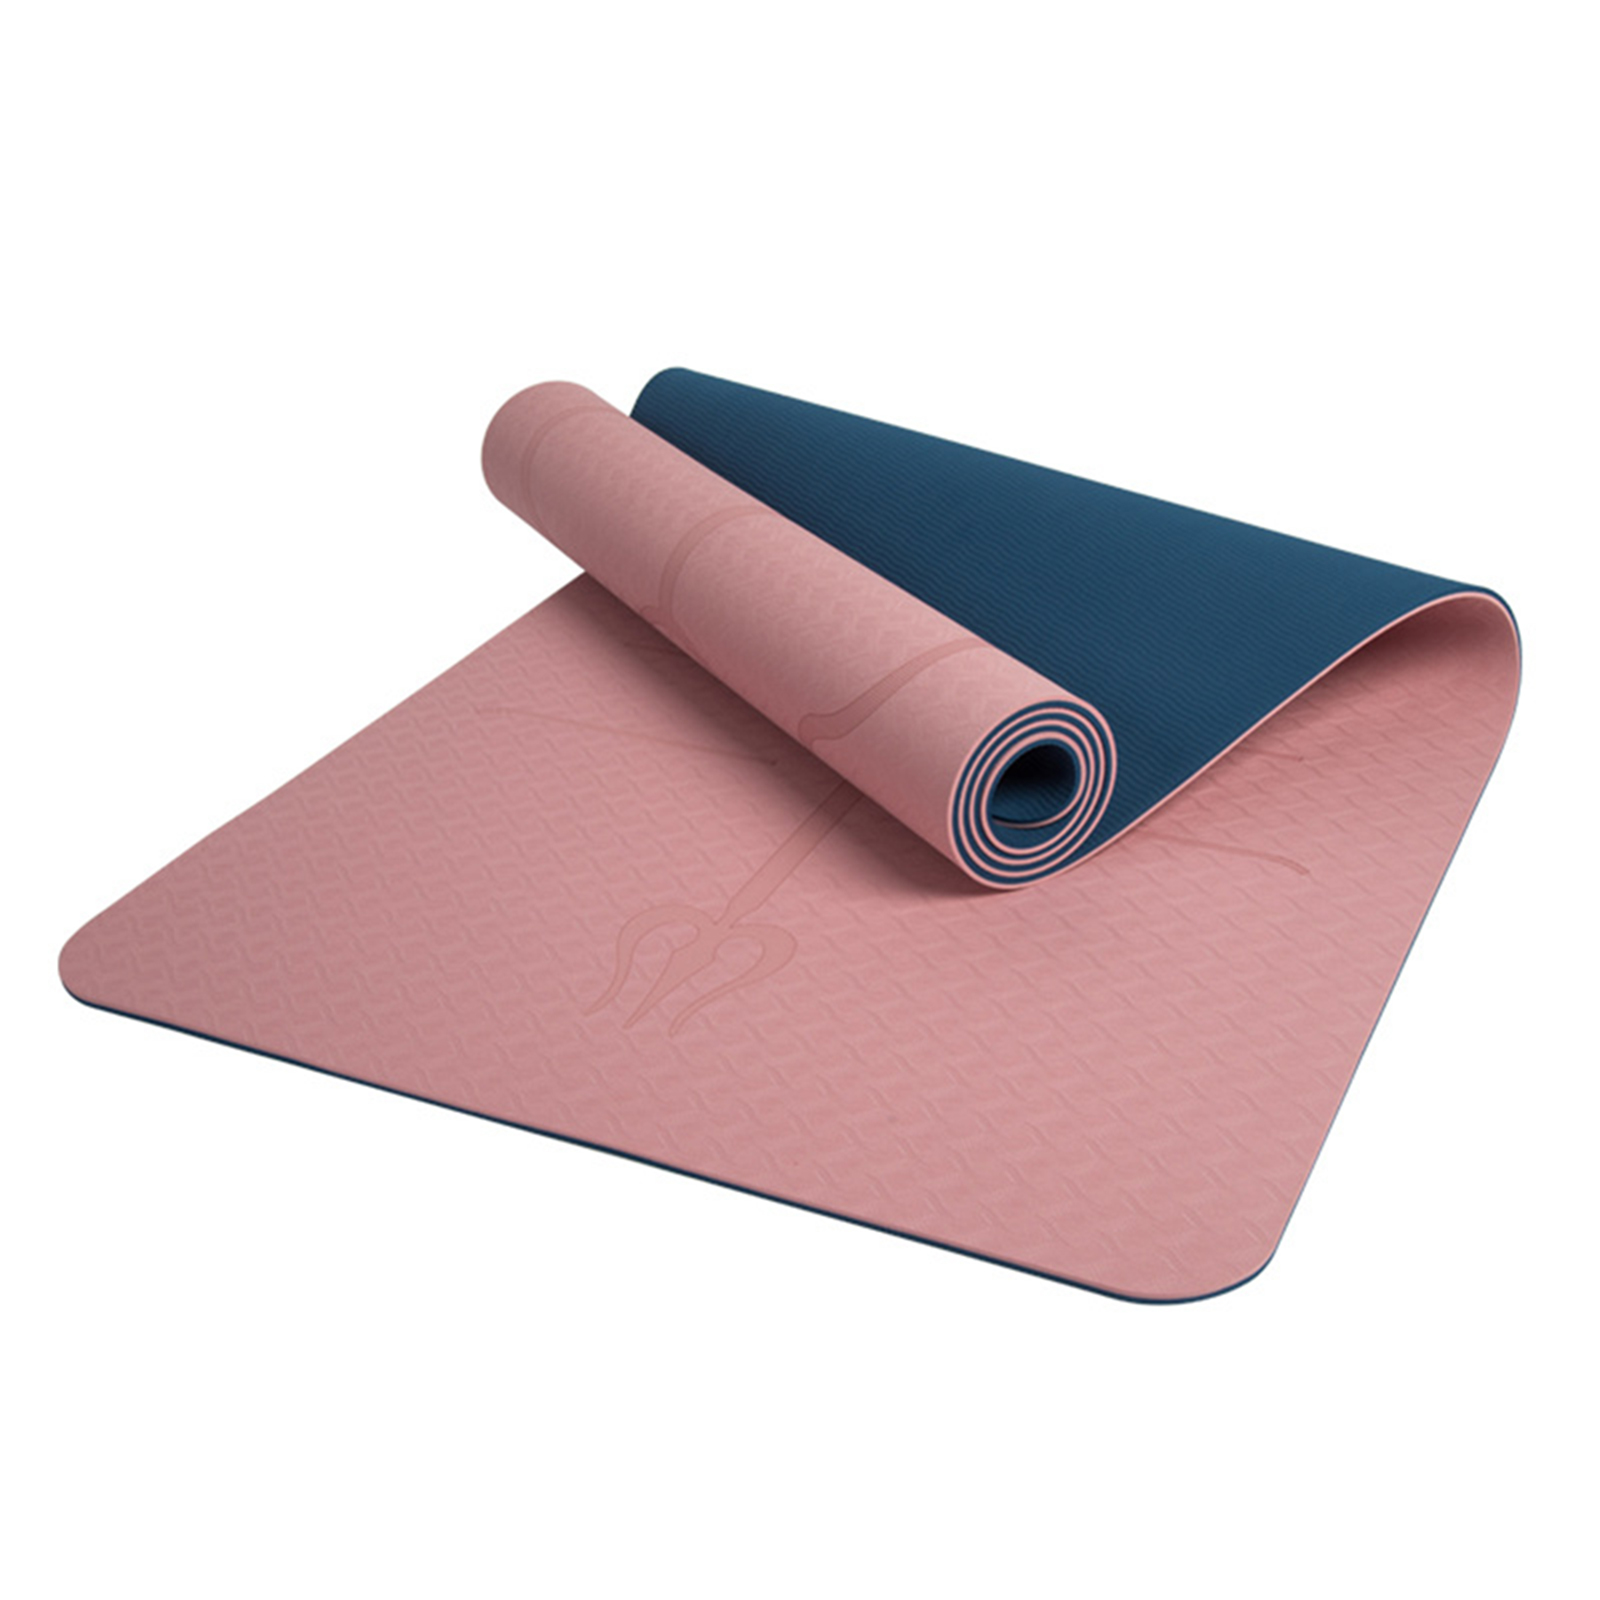 Non-Slip Yoga Mat With Alignment Marks Width 80cm TPE Exercise Fitness Mat For Home Workout Outdoors Travel Pink + Gray 183 x 80 x 0.6cm